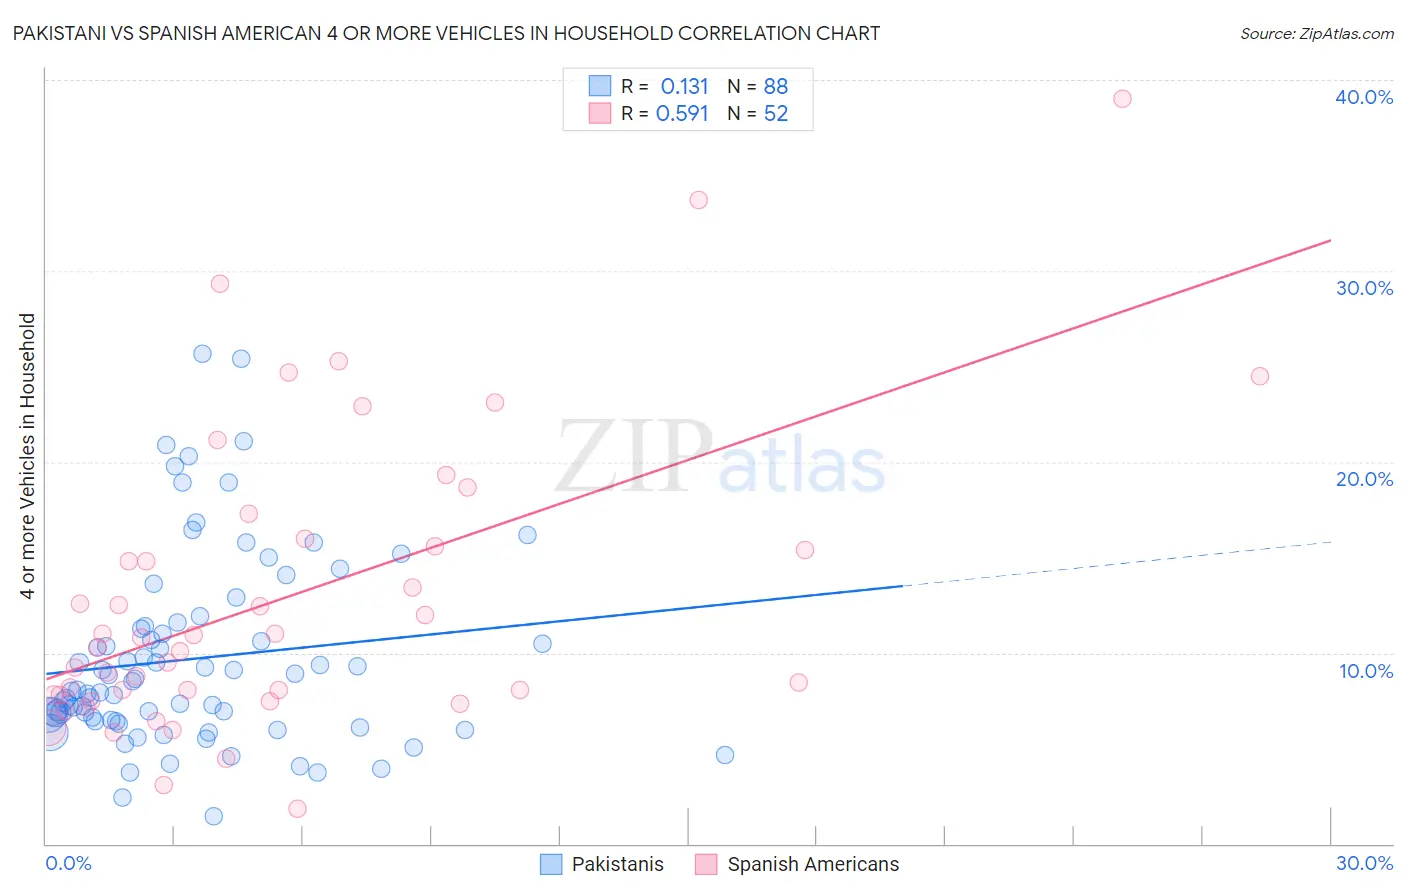 Pakistani vs Spanish American 4 or more Vehicles in Household